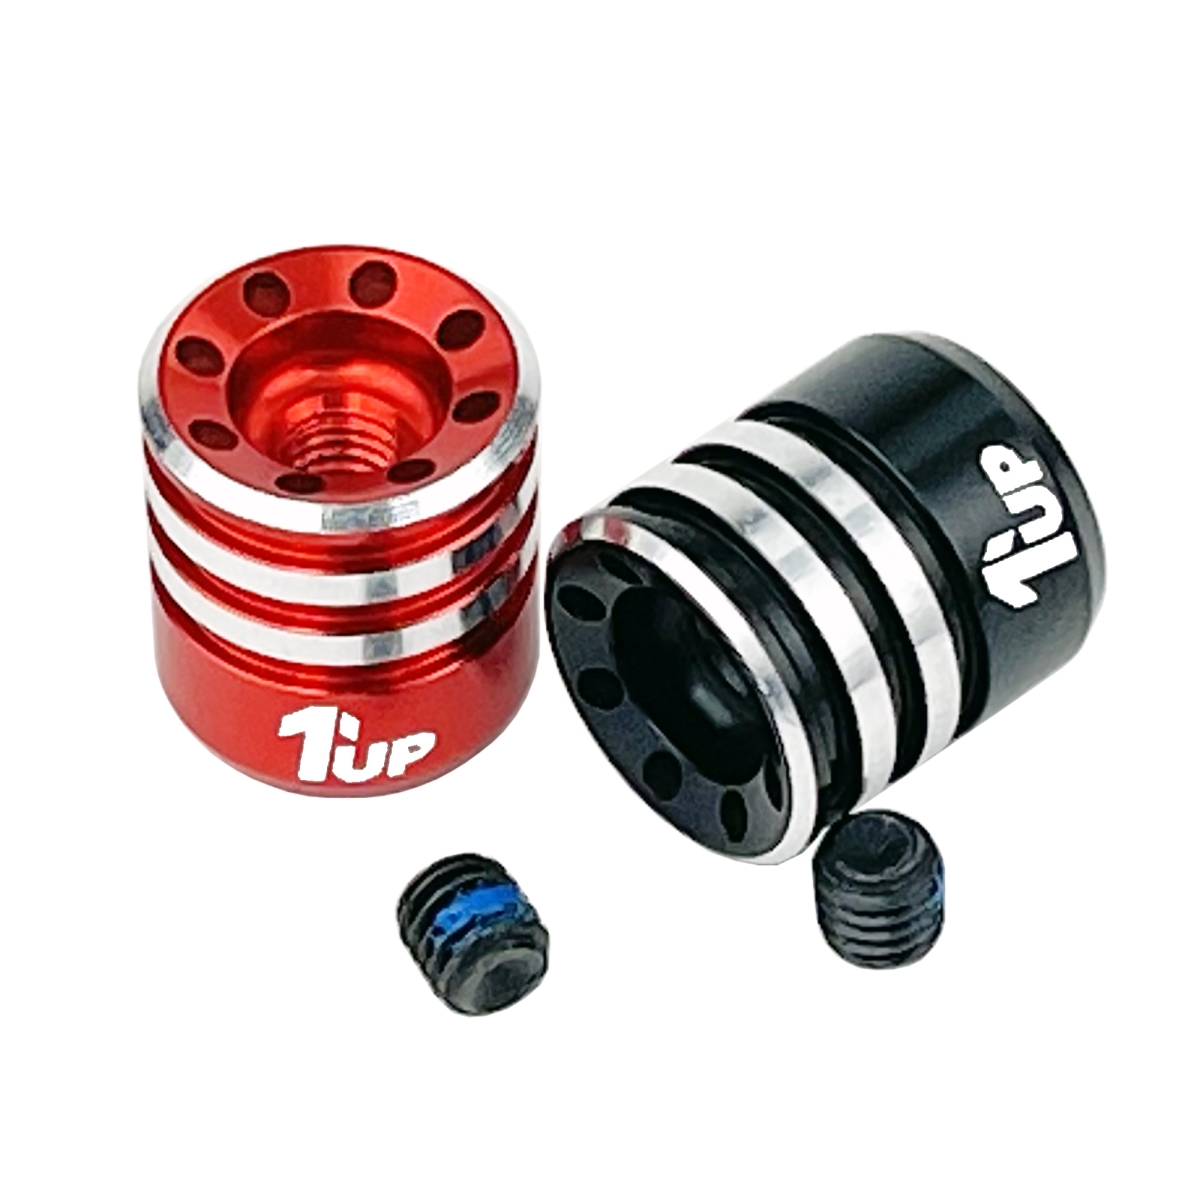 Picture of 1UP Racing 1UP190434 Heatsink Bullet Plug Grips Fits LowPro Bullet Plugs